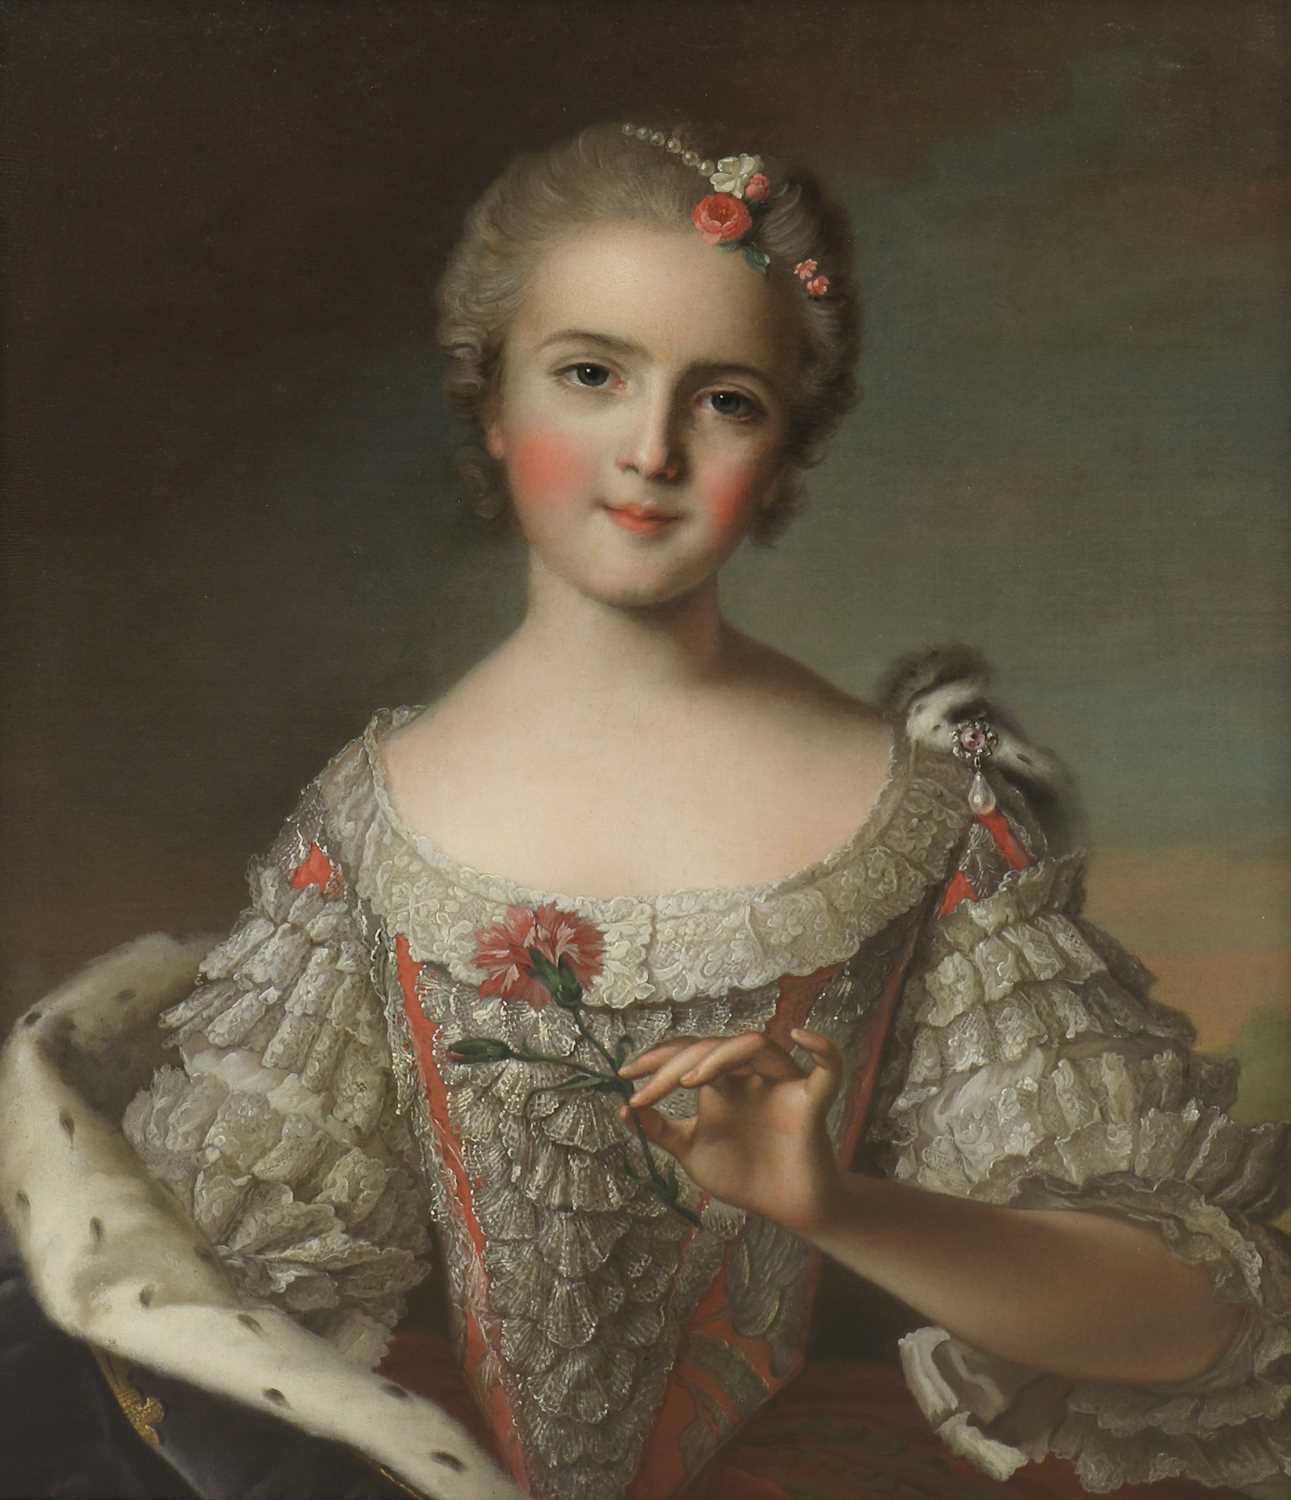 Lot 37 - Circle of Jean-Marc Nattier (French, 1685-1766)